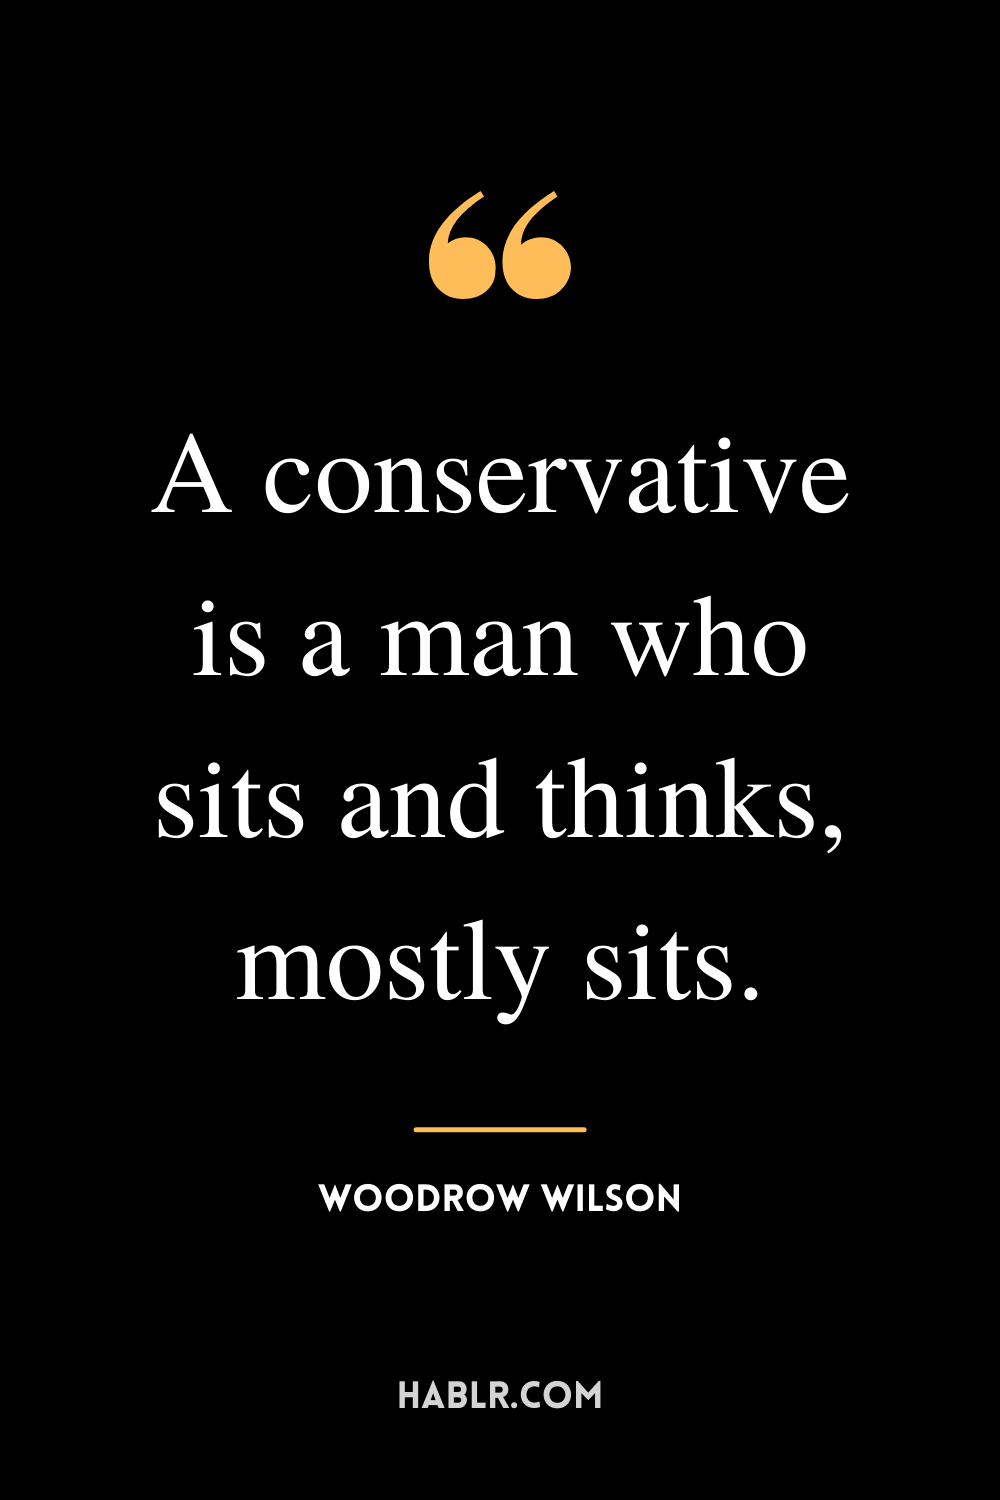 “A conservative is a man who sits and thinks, mostly sits.” -Woodrow Wilson